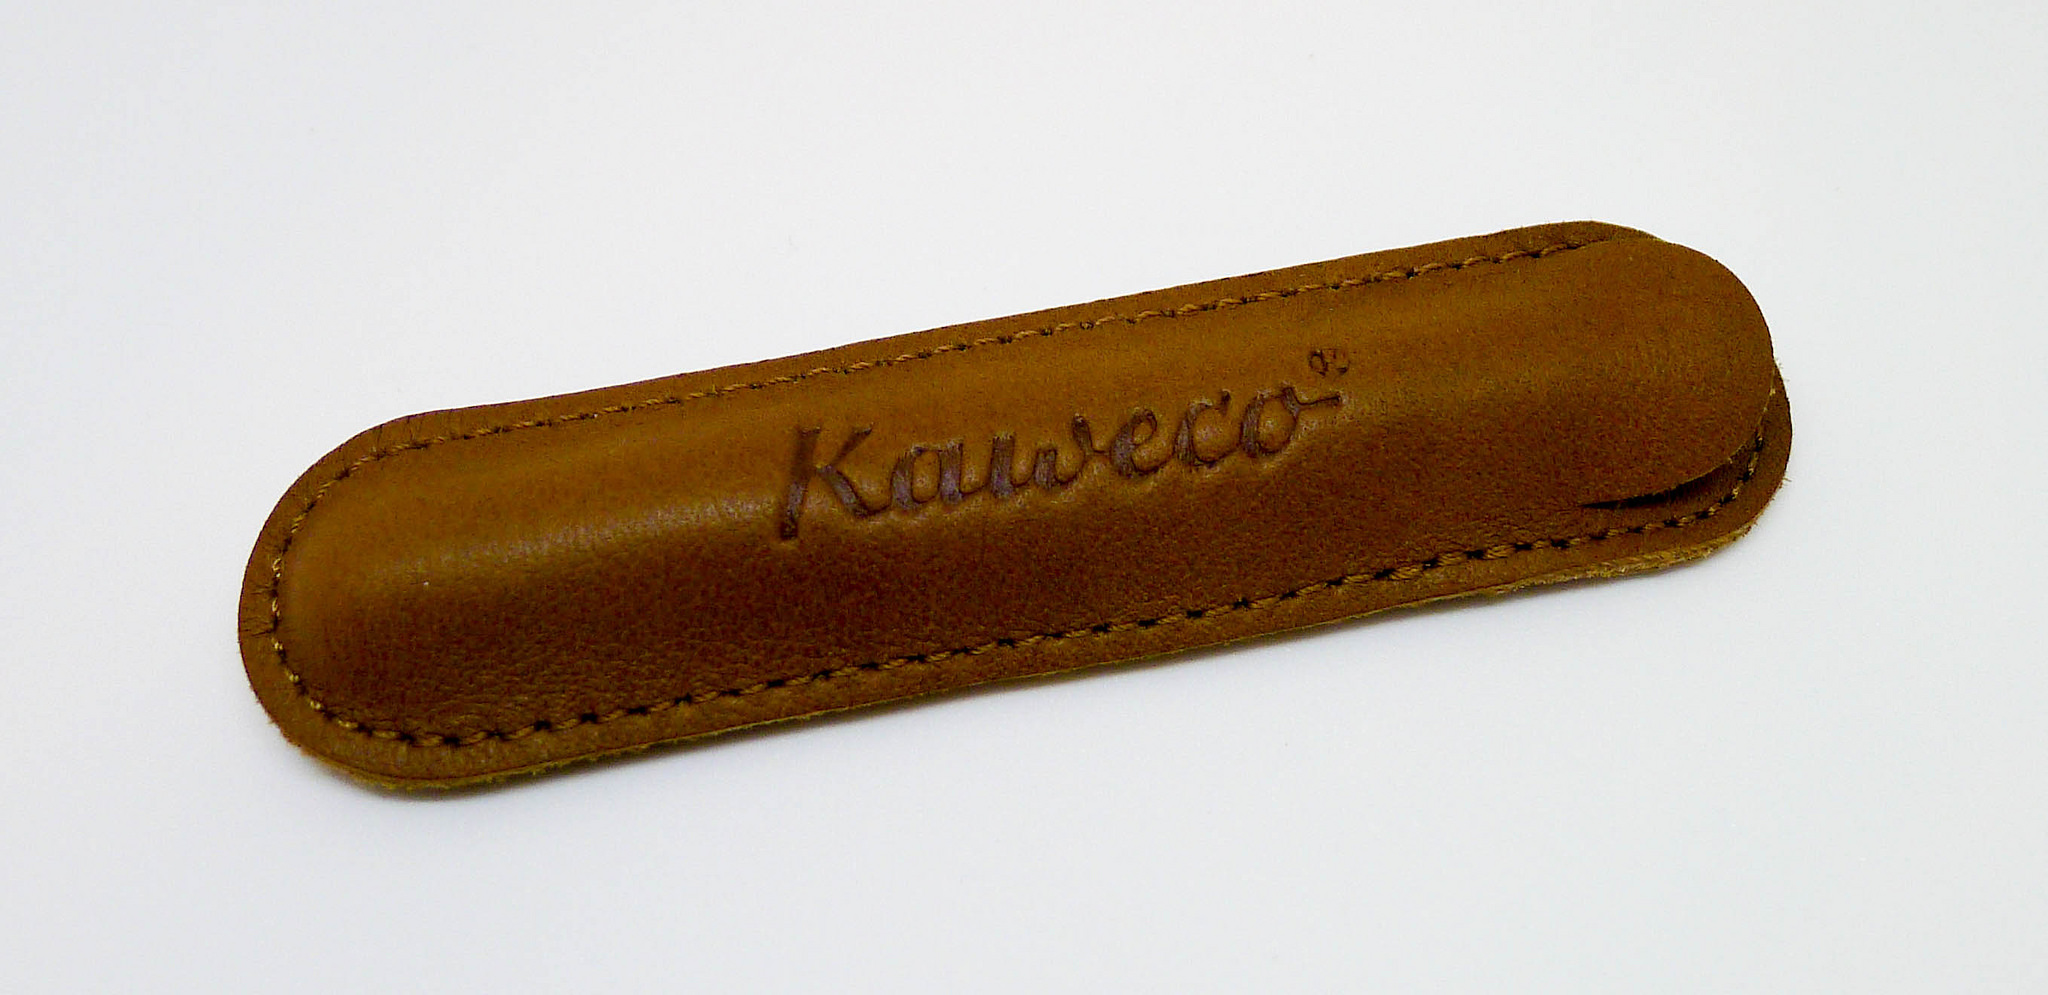 Review: Kaweco Sport in Dark Brown - The Well-Appointed Desk